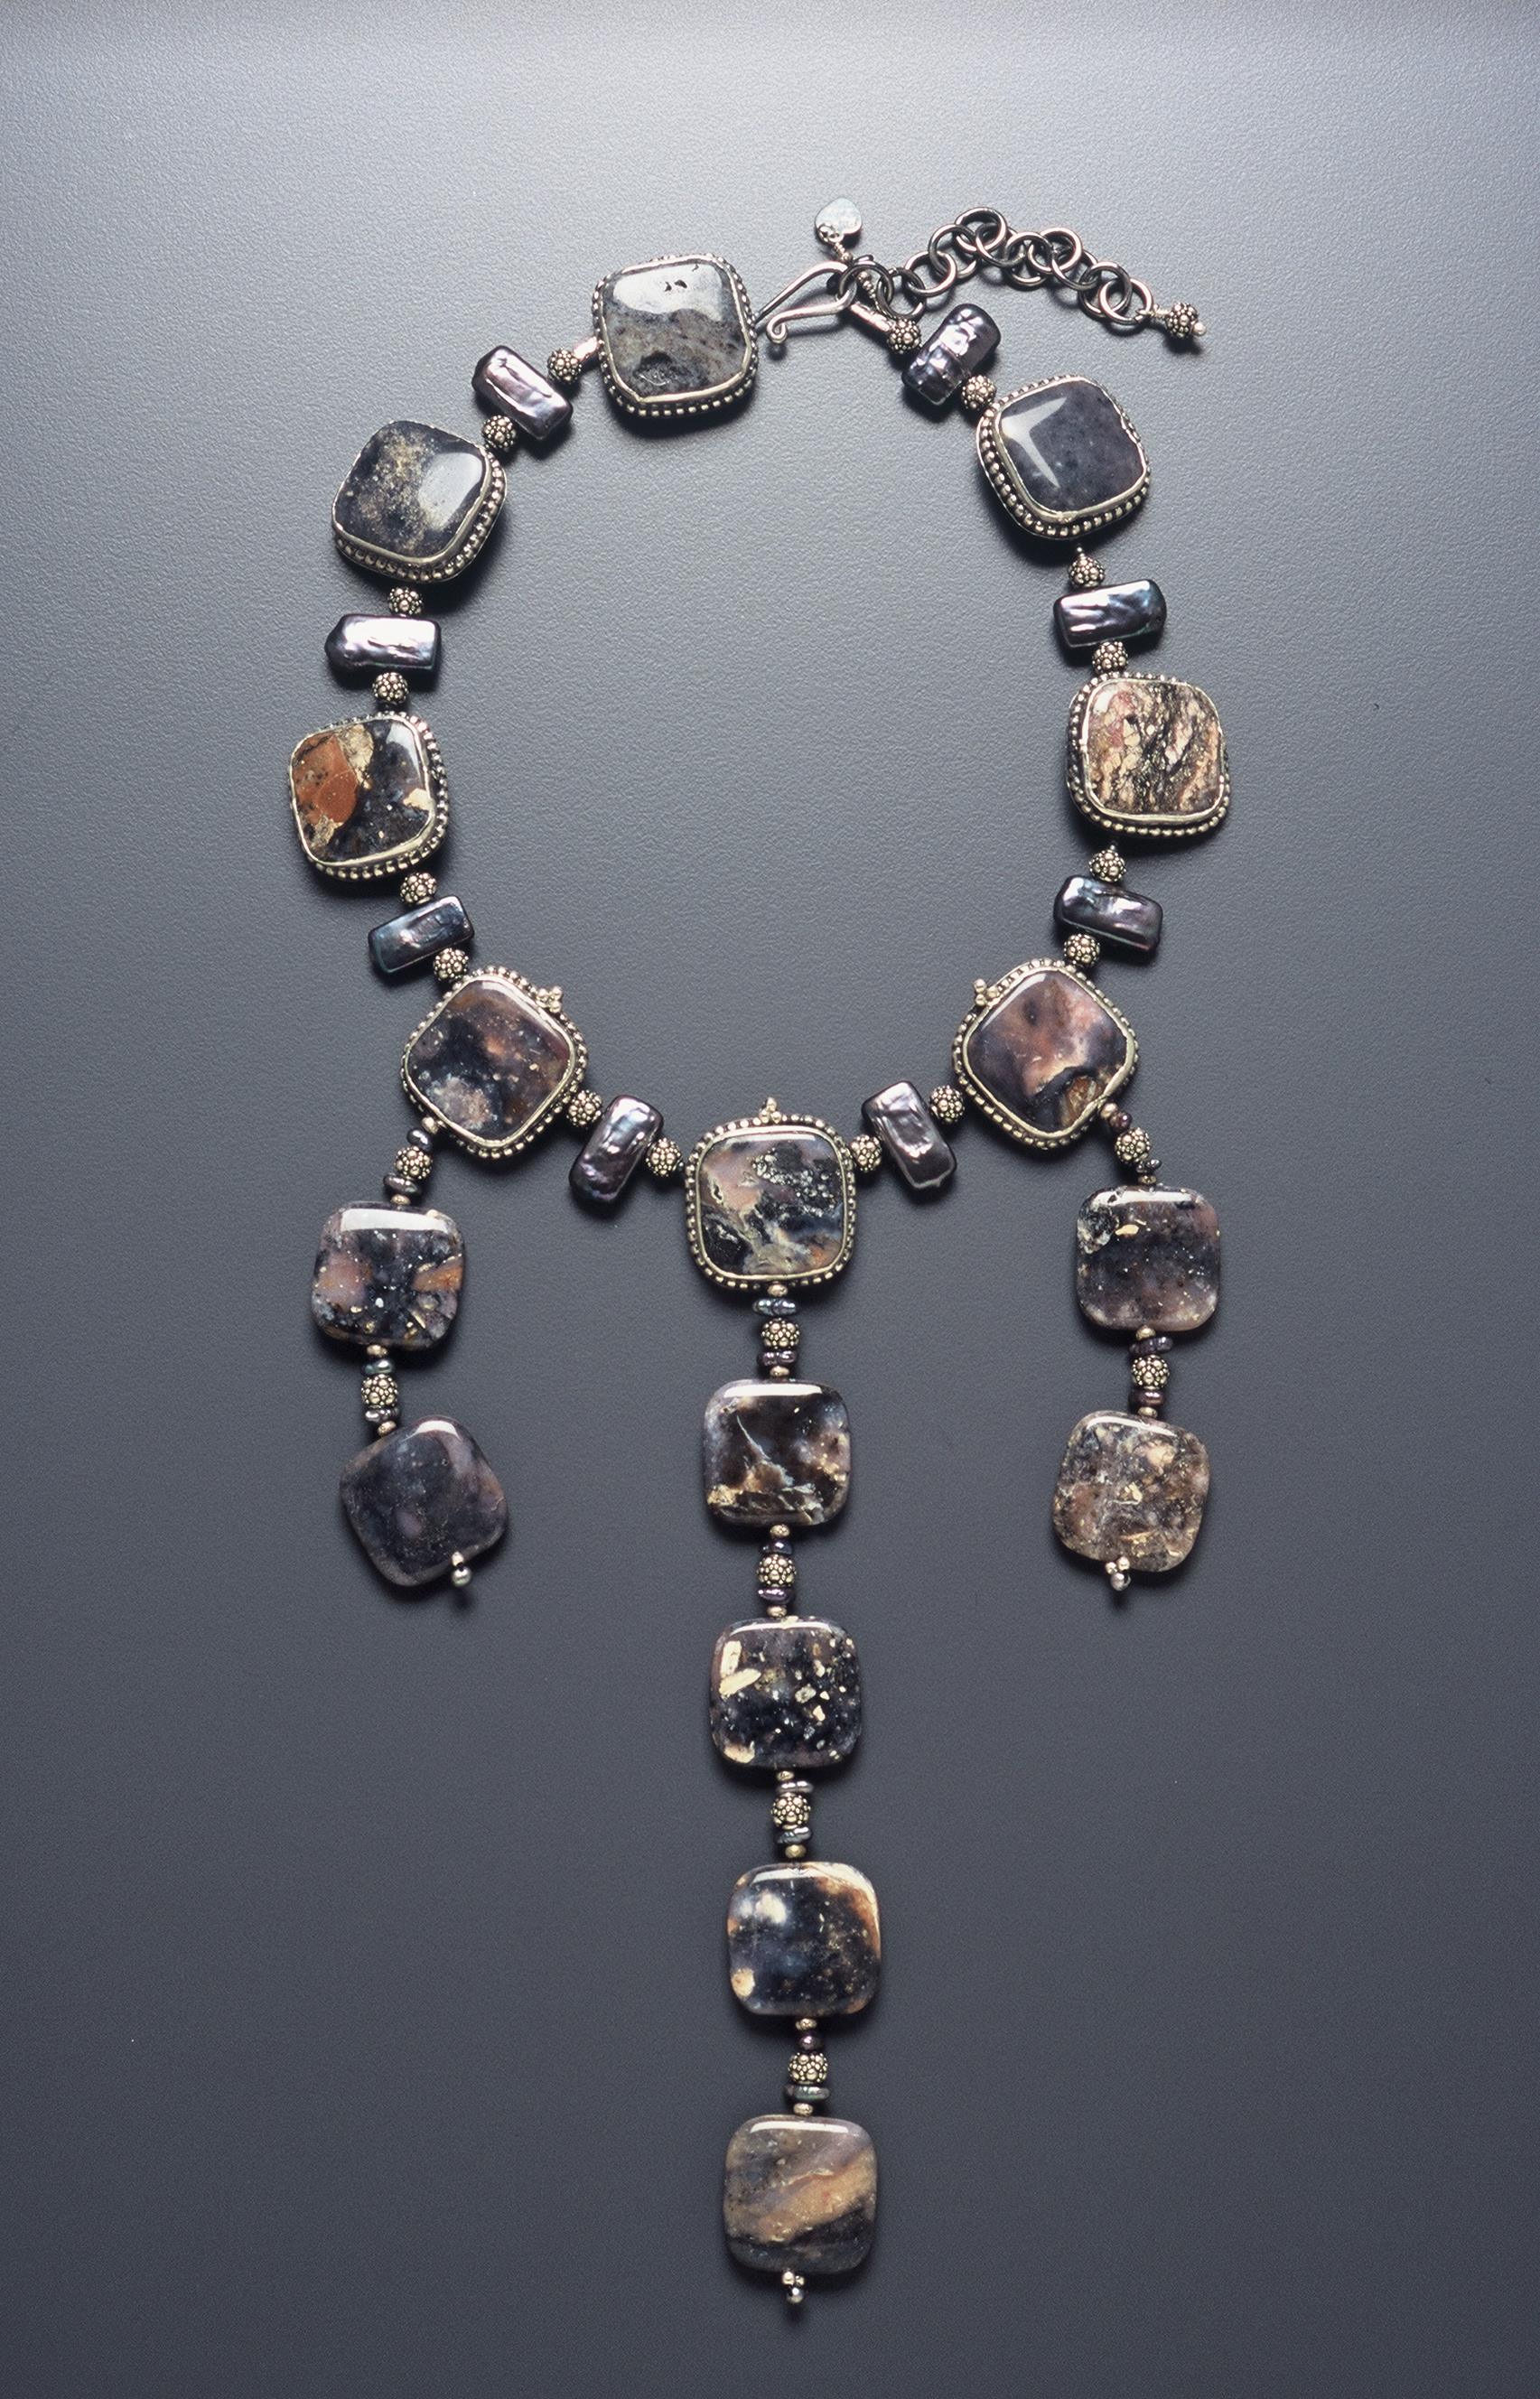 Detail of Images from Hubble Necklace